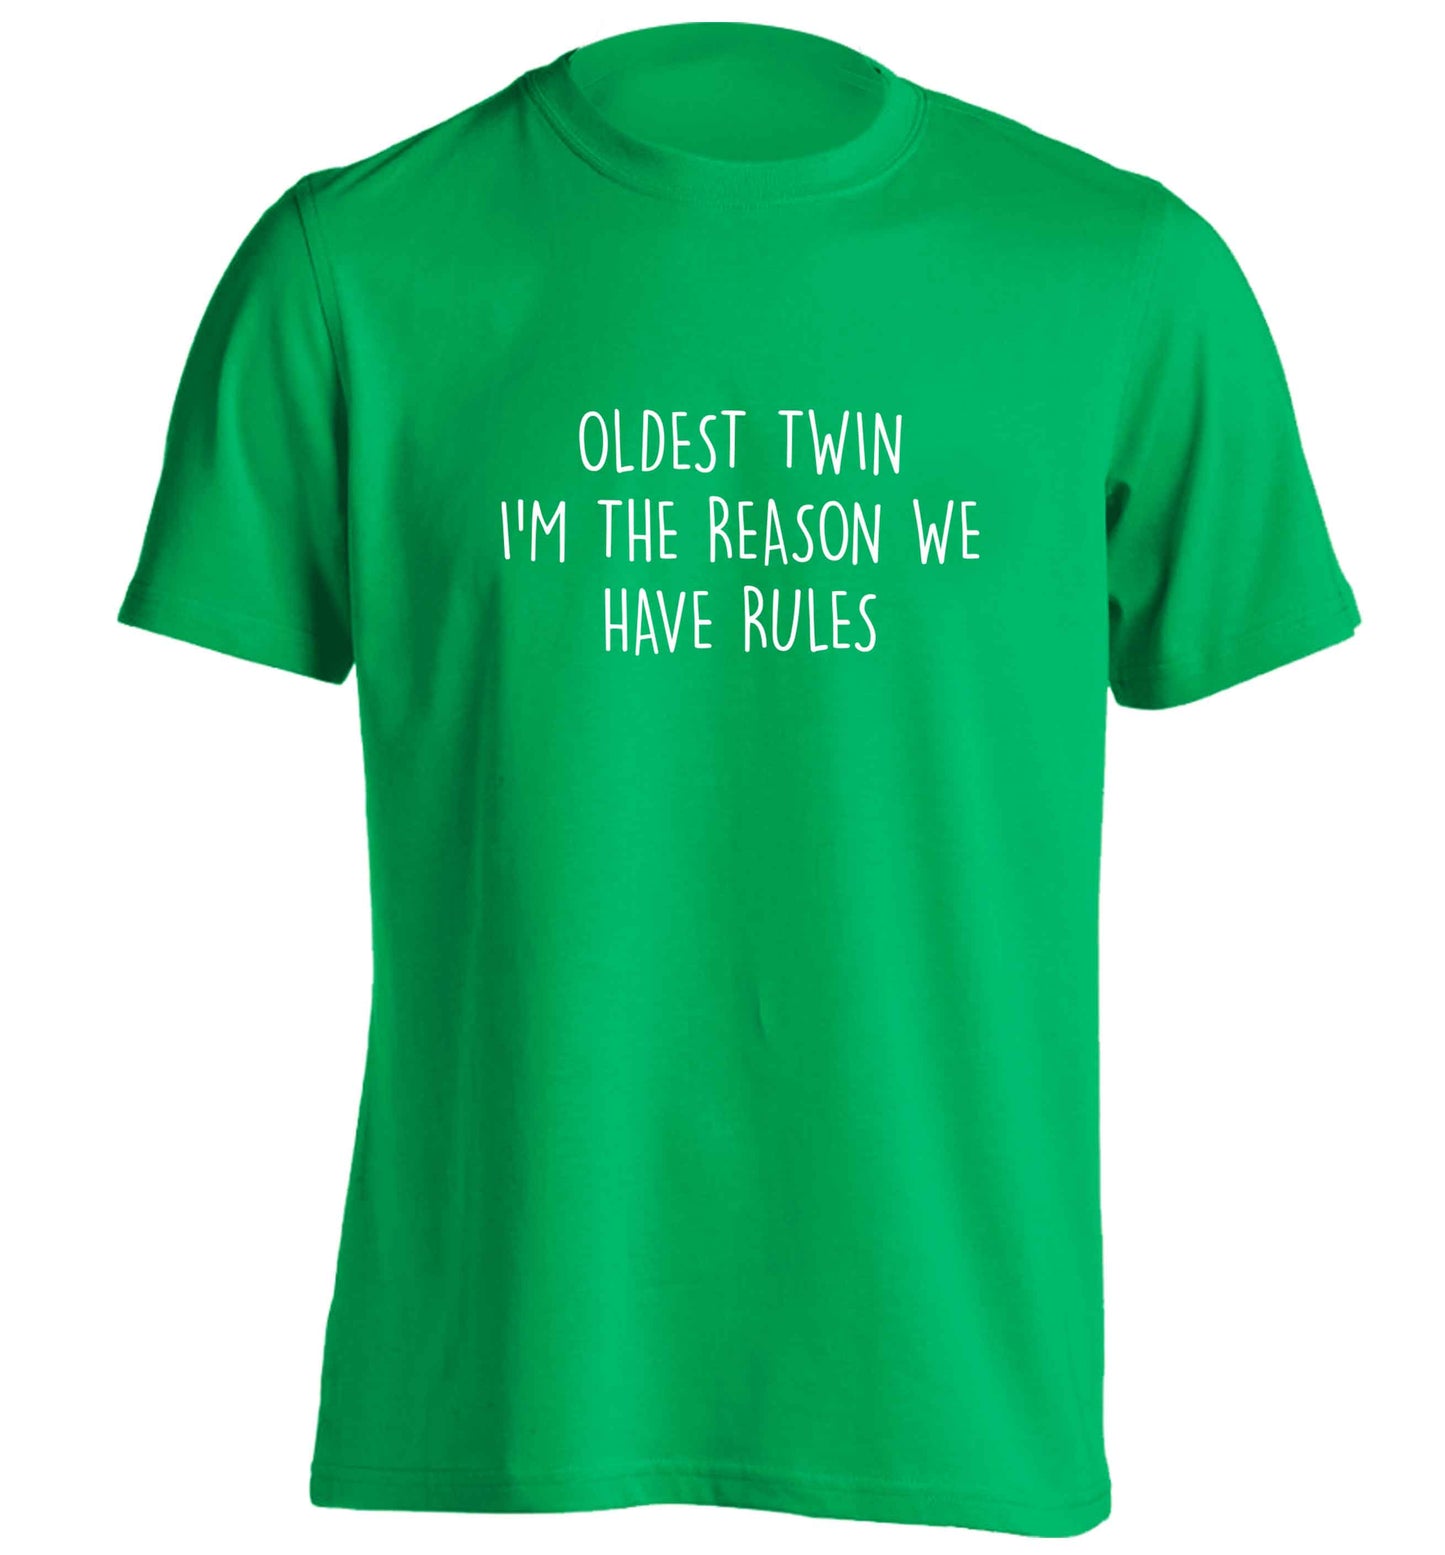 Oldest twin I'm the reason we have rules adults unisex green Tshirt 2XL